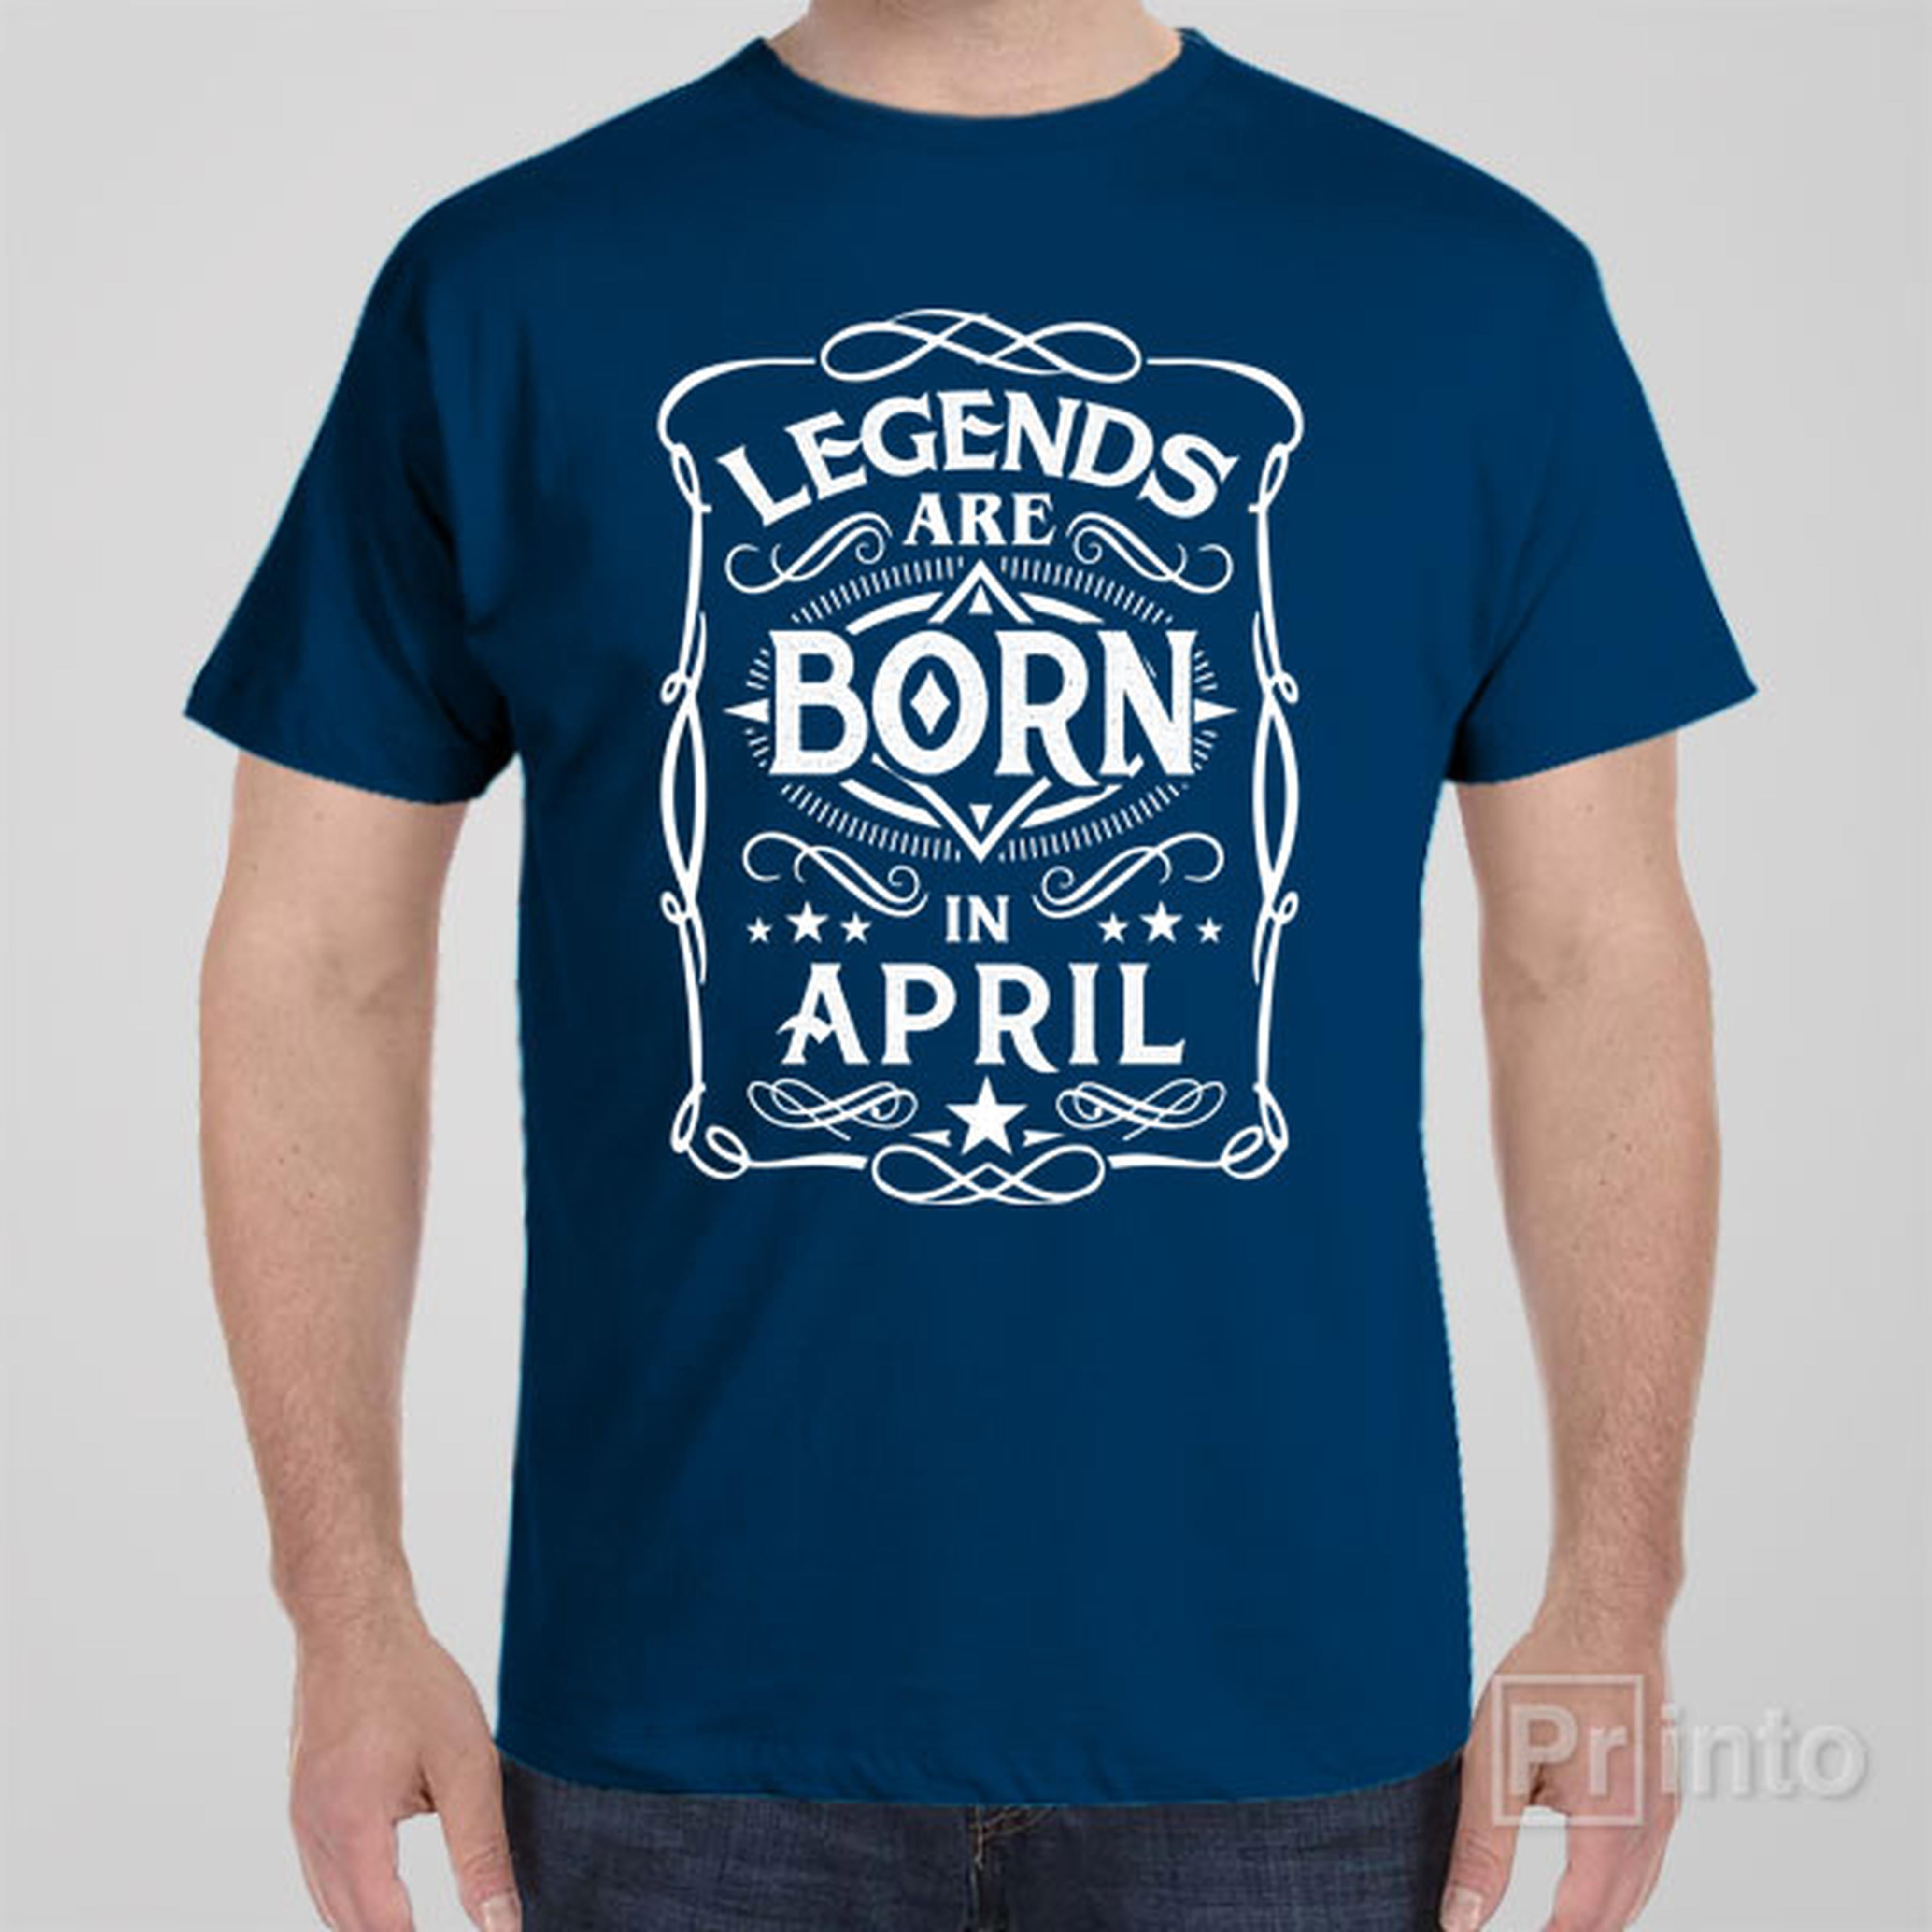 legends-are-born-in-april-t-shirt